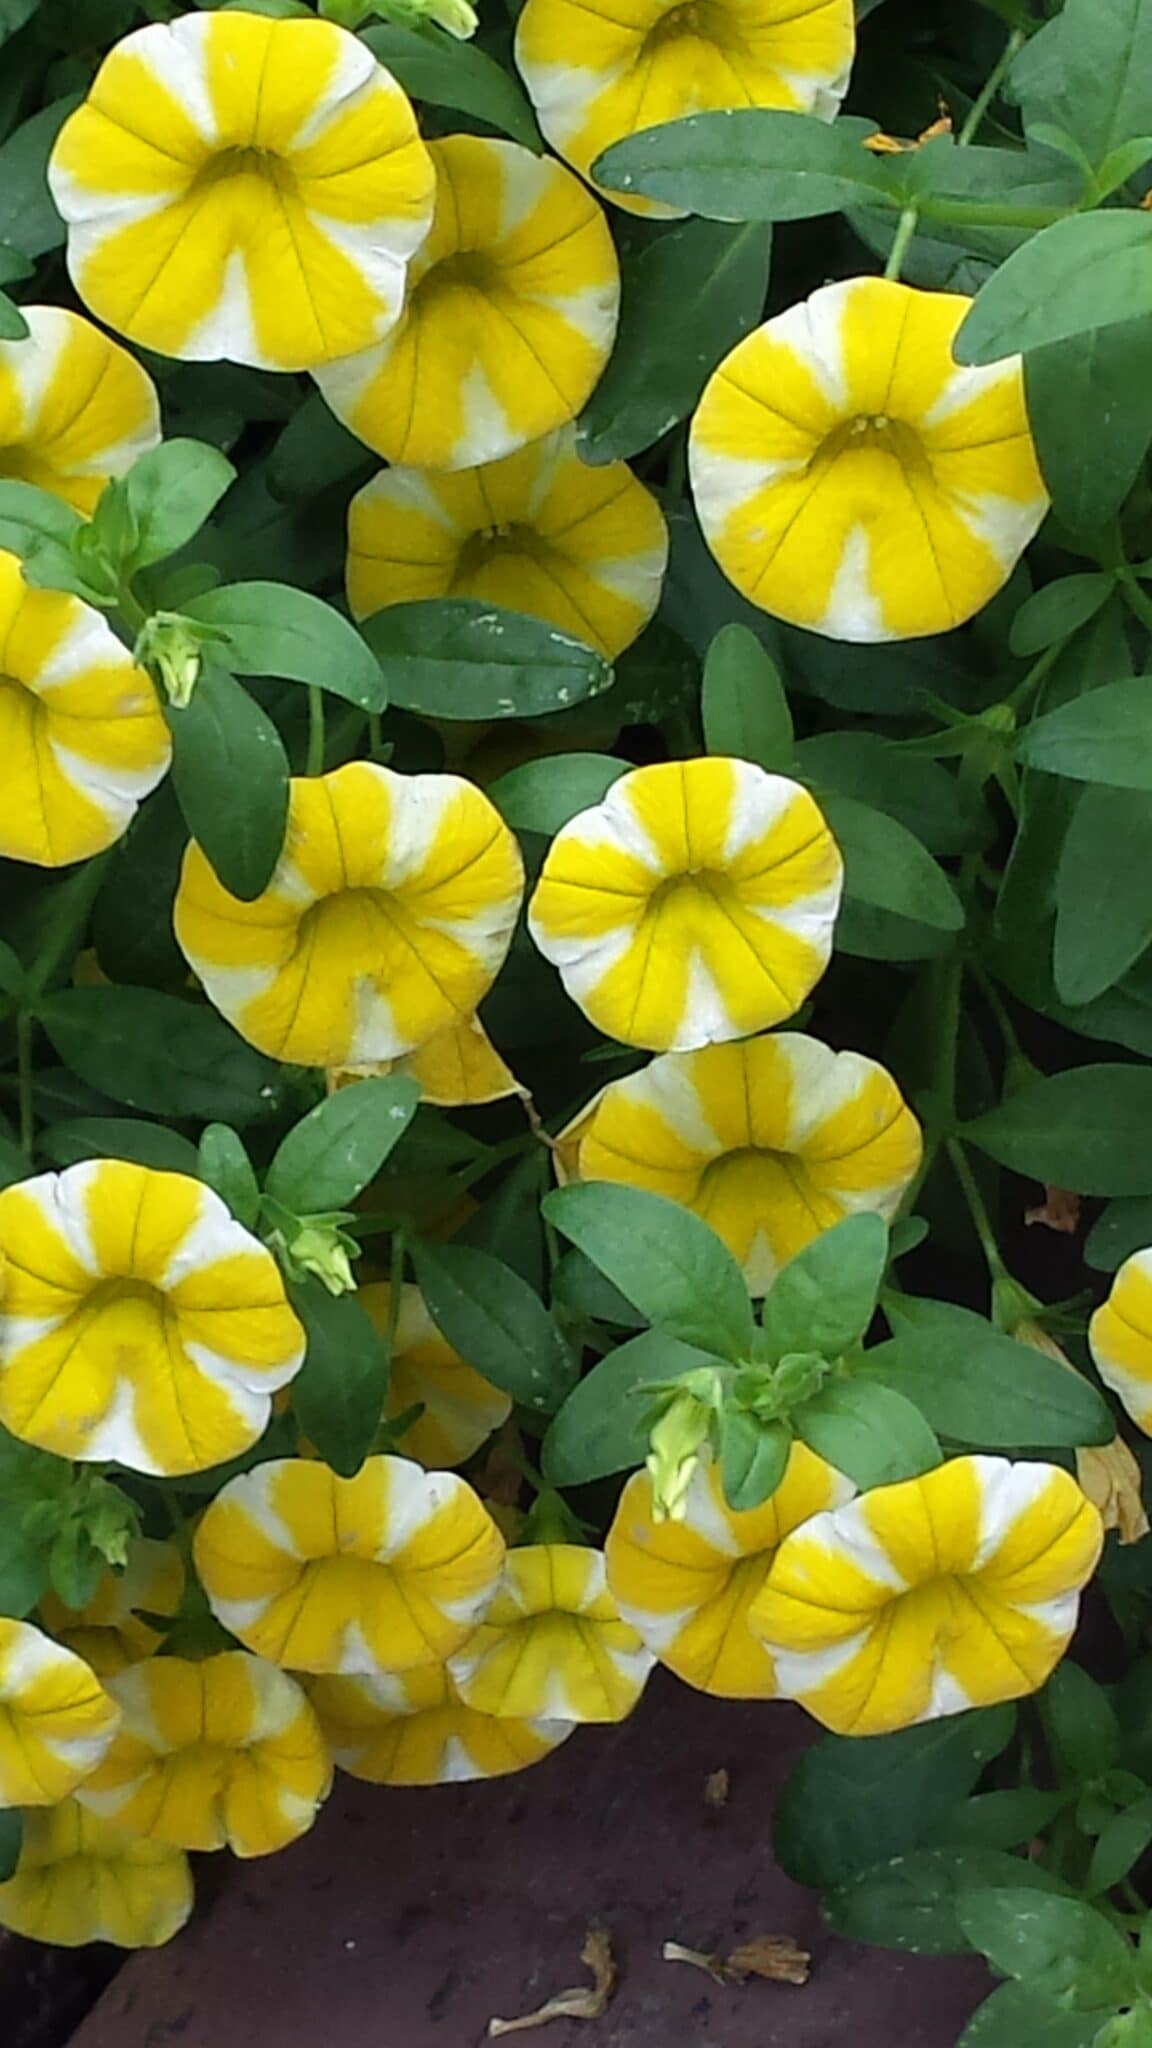 Yellow and white pansy